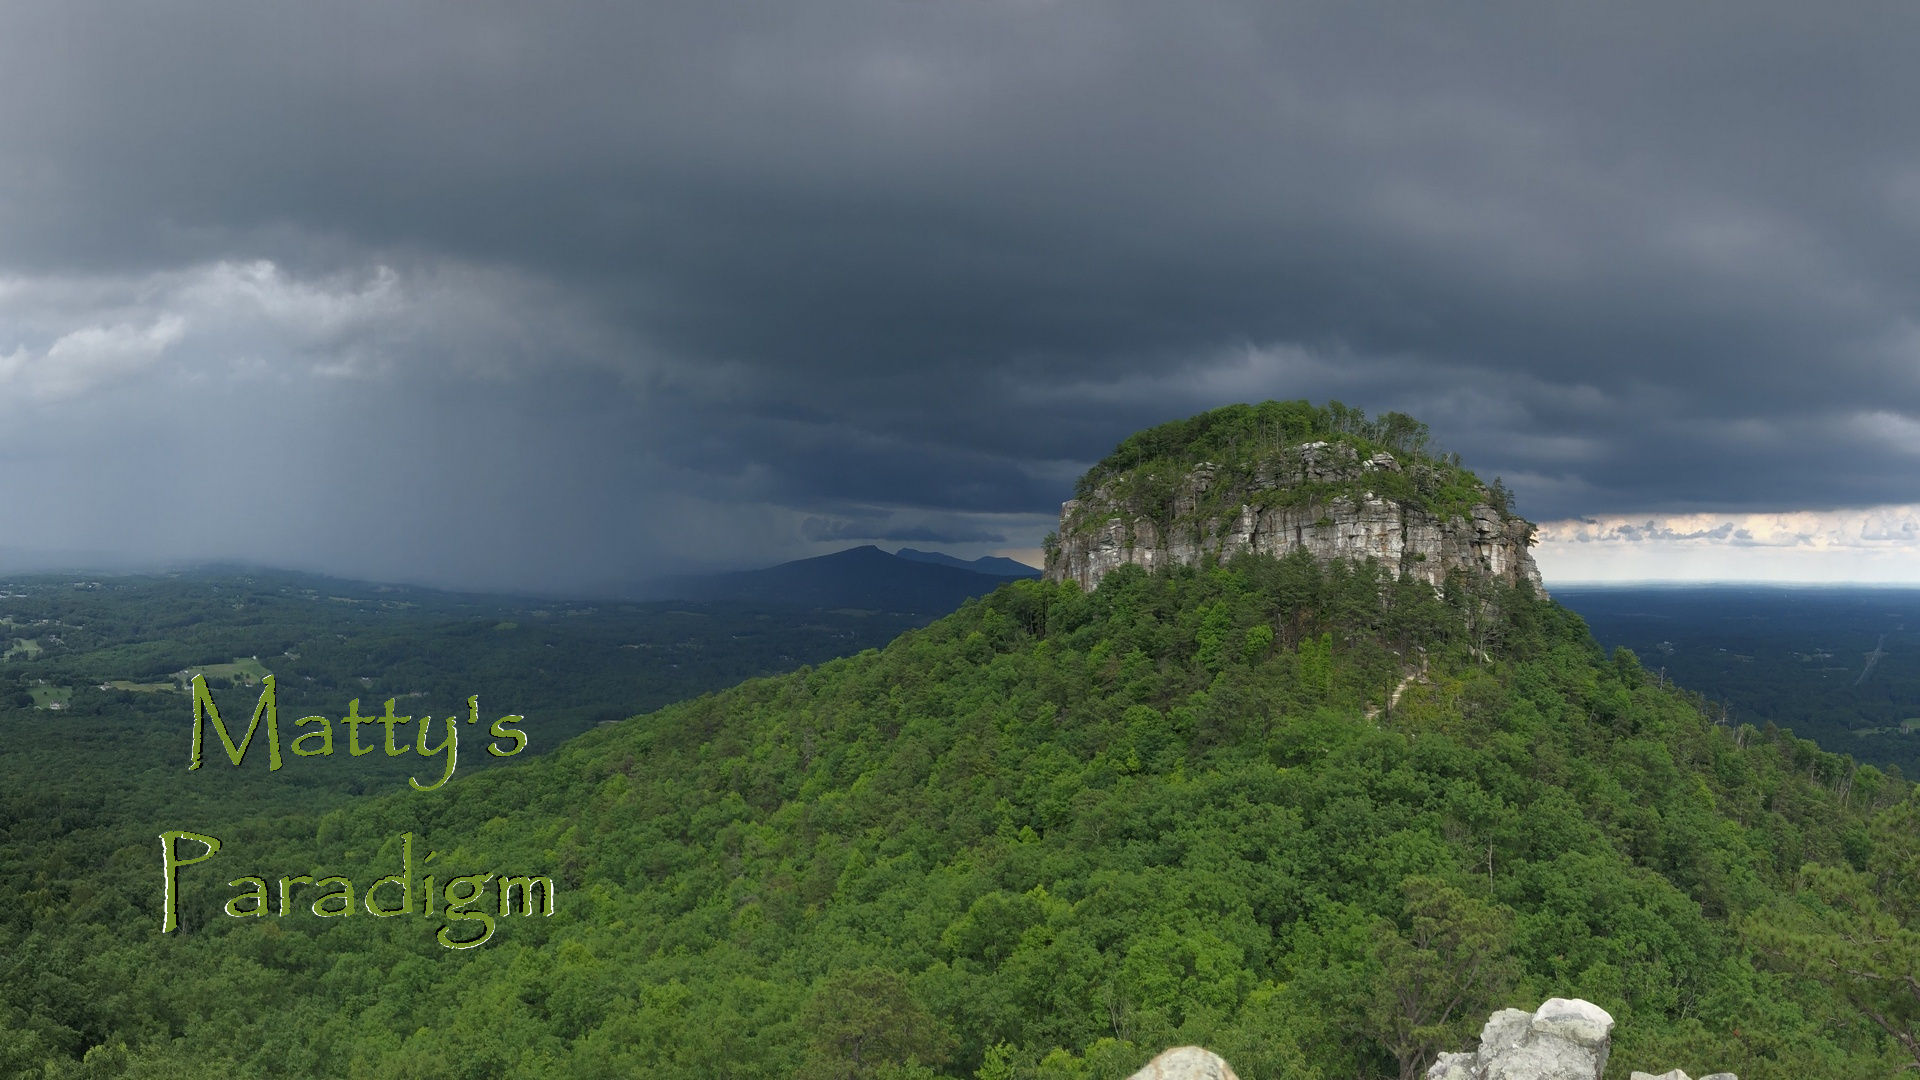 Is Pilot Mountain, North Carolina, one of the pillars of the earth?